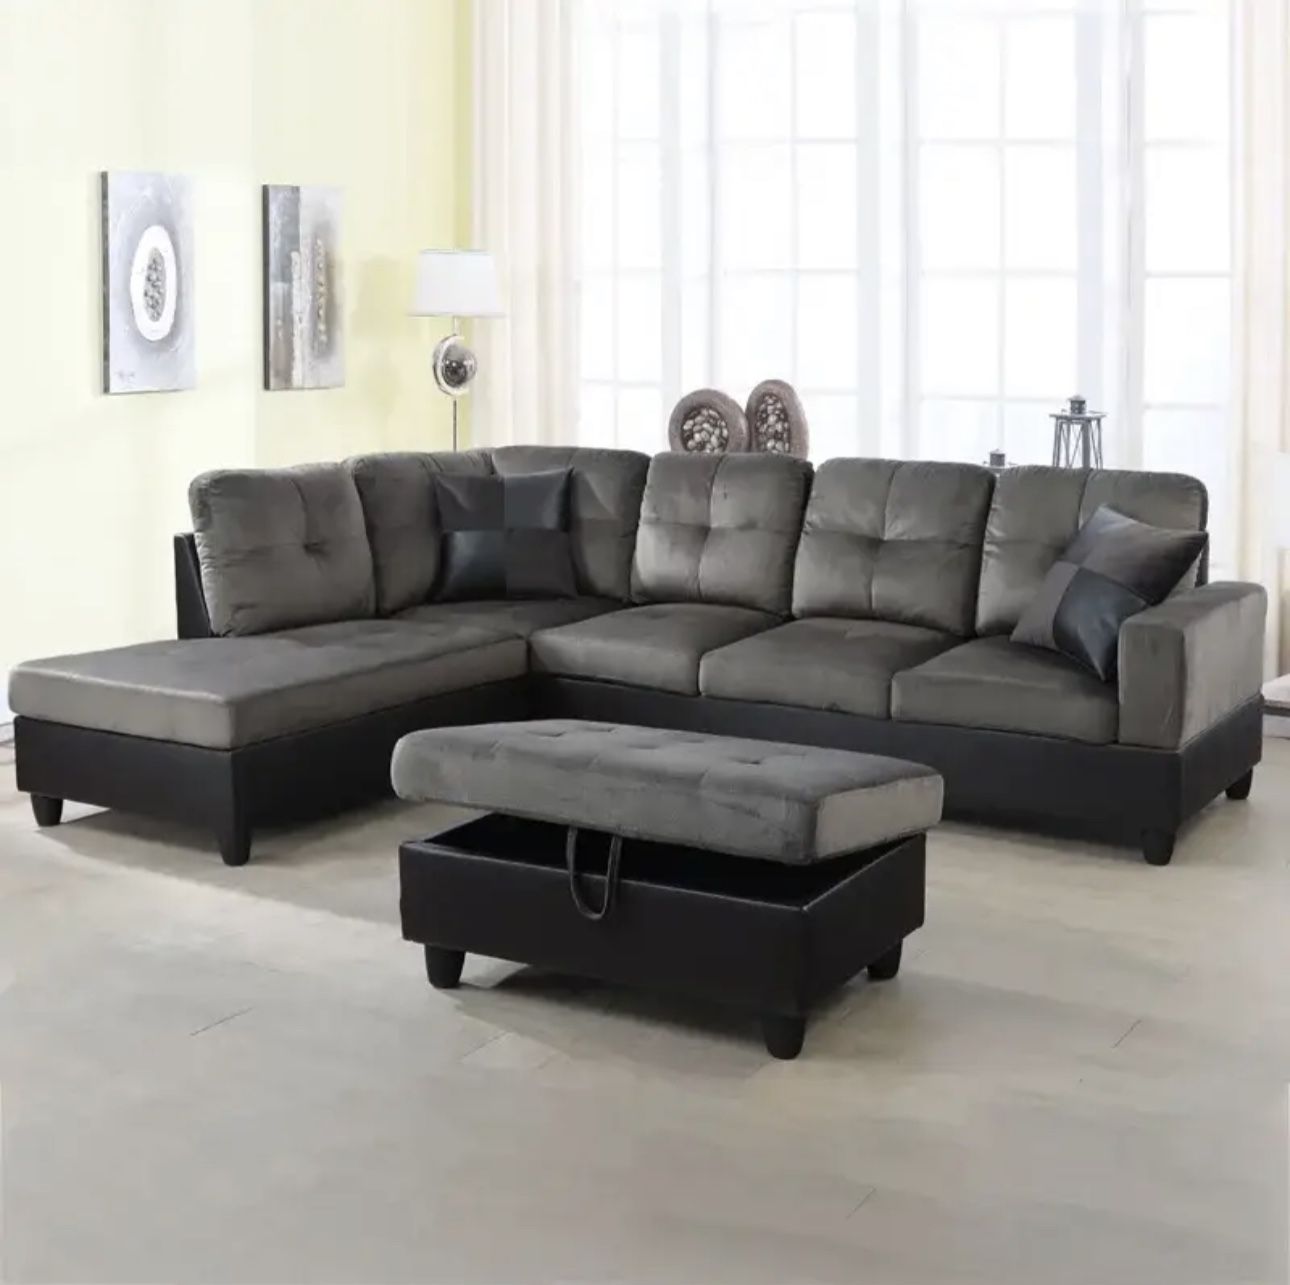 Hommoo Sectional Sofa,  Sectional Couch, Small L Shaped Sectional Sofa, Modern Sofa Set for Living Room, Taupe